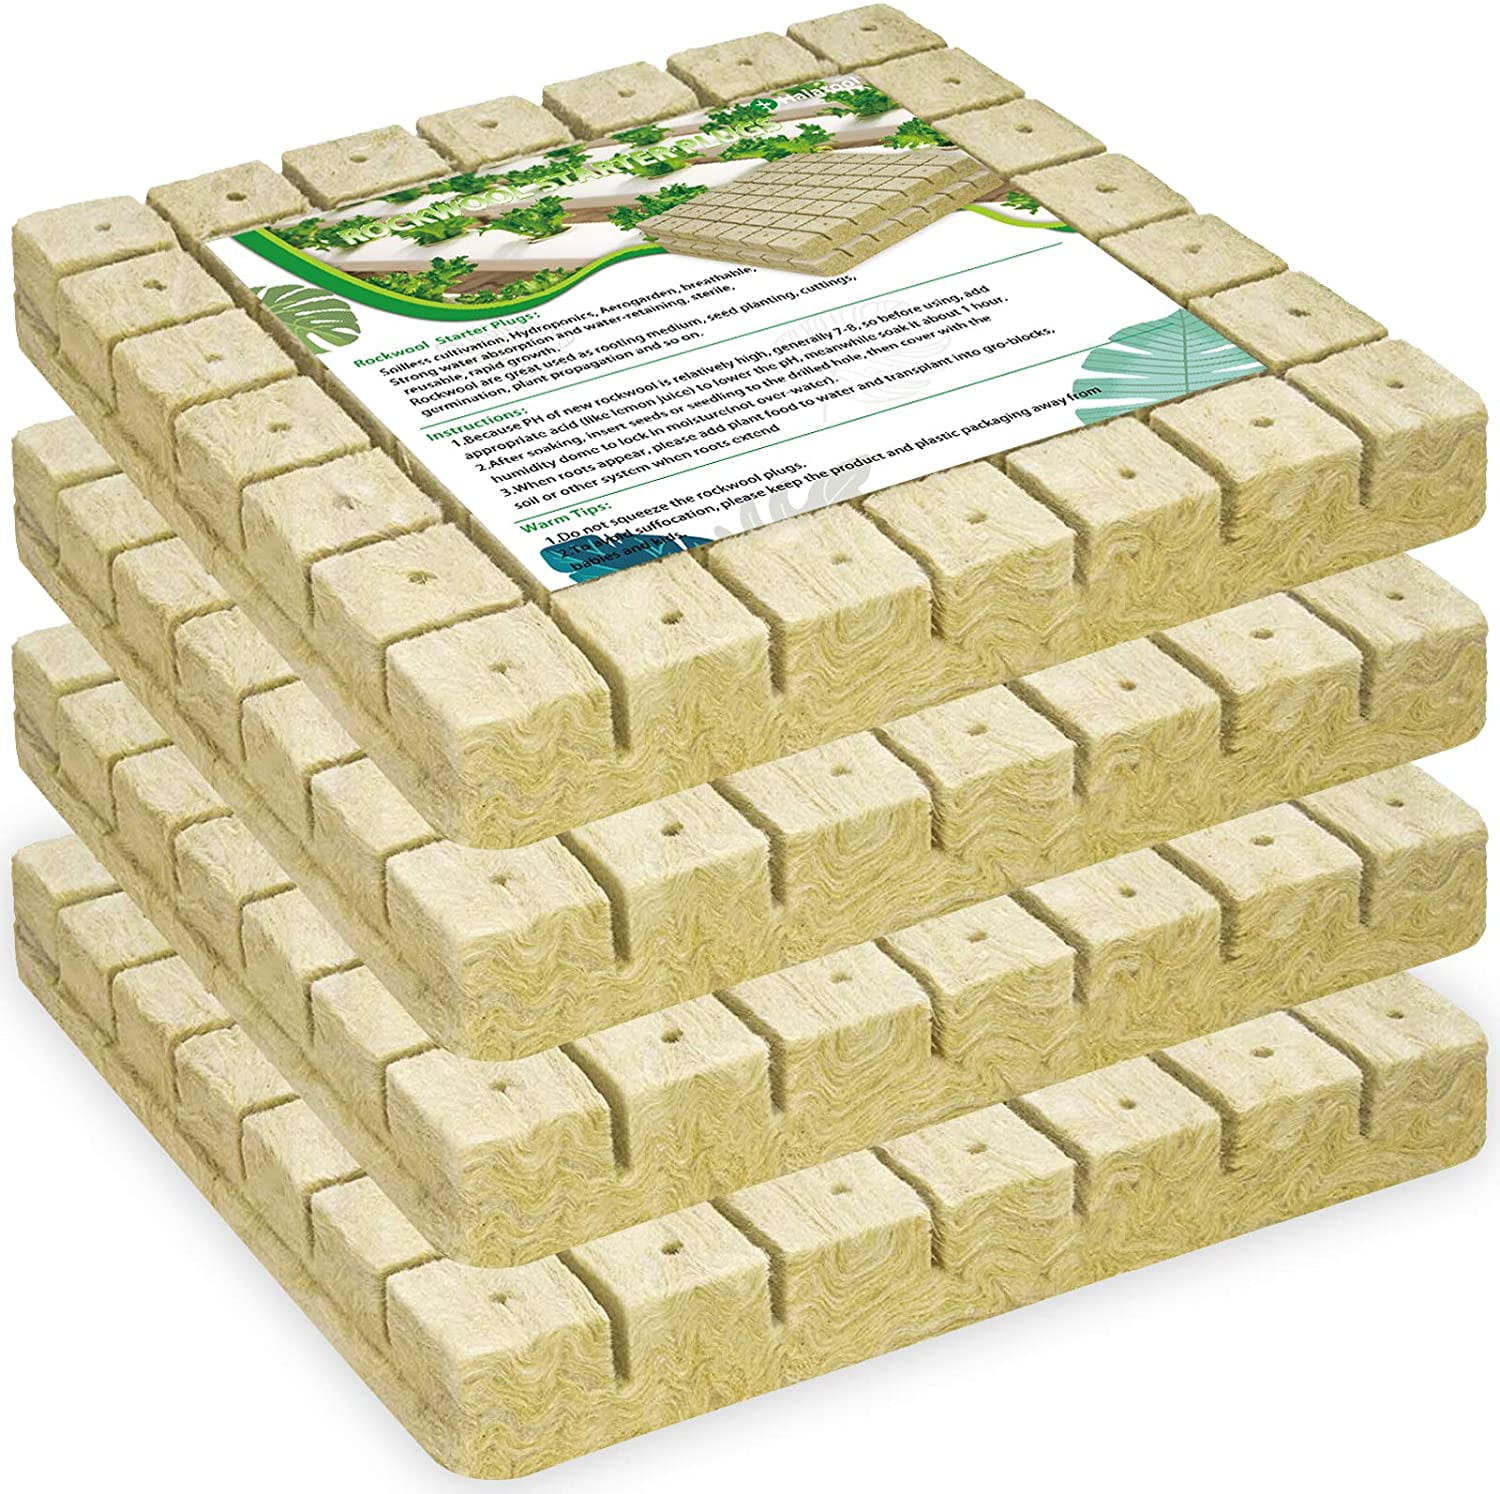 CastleGreens Rock Wool Planting Cubes, Rockwool Cubes 1 inch, Rockwool  Cubes for Hydroponics, Great for Rooting, Cuttings, Cloning Plants, Seed